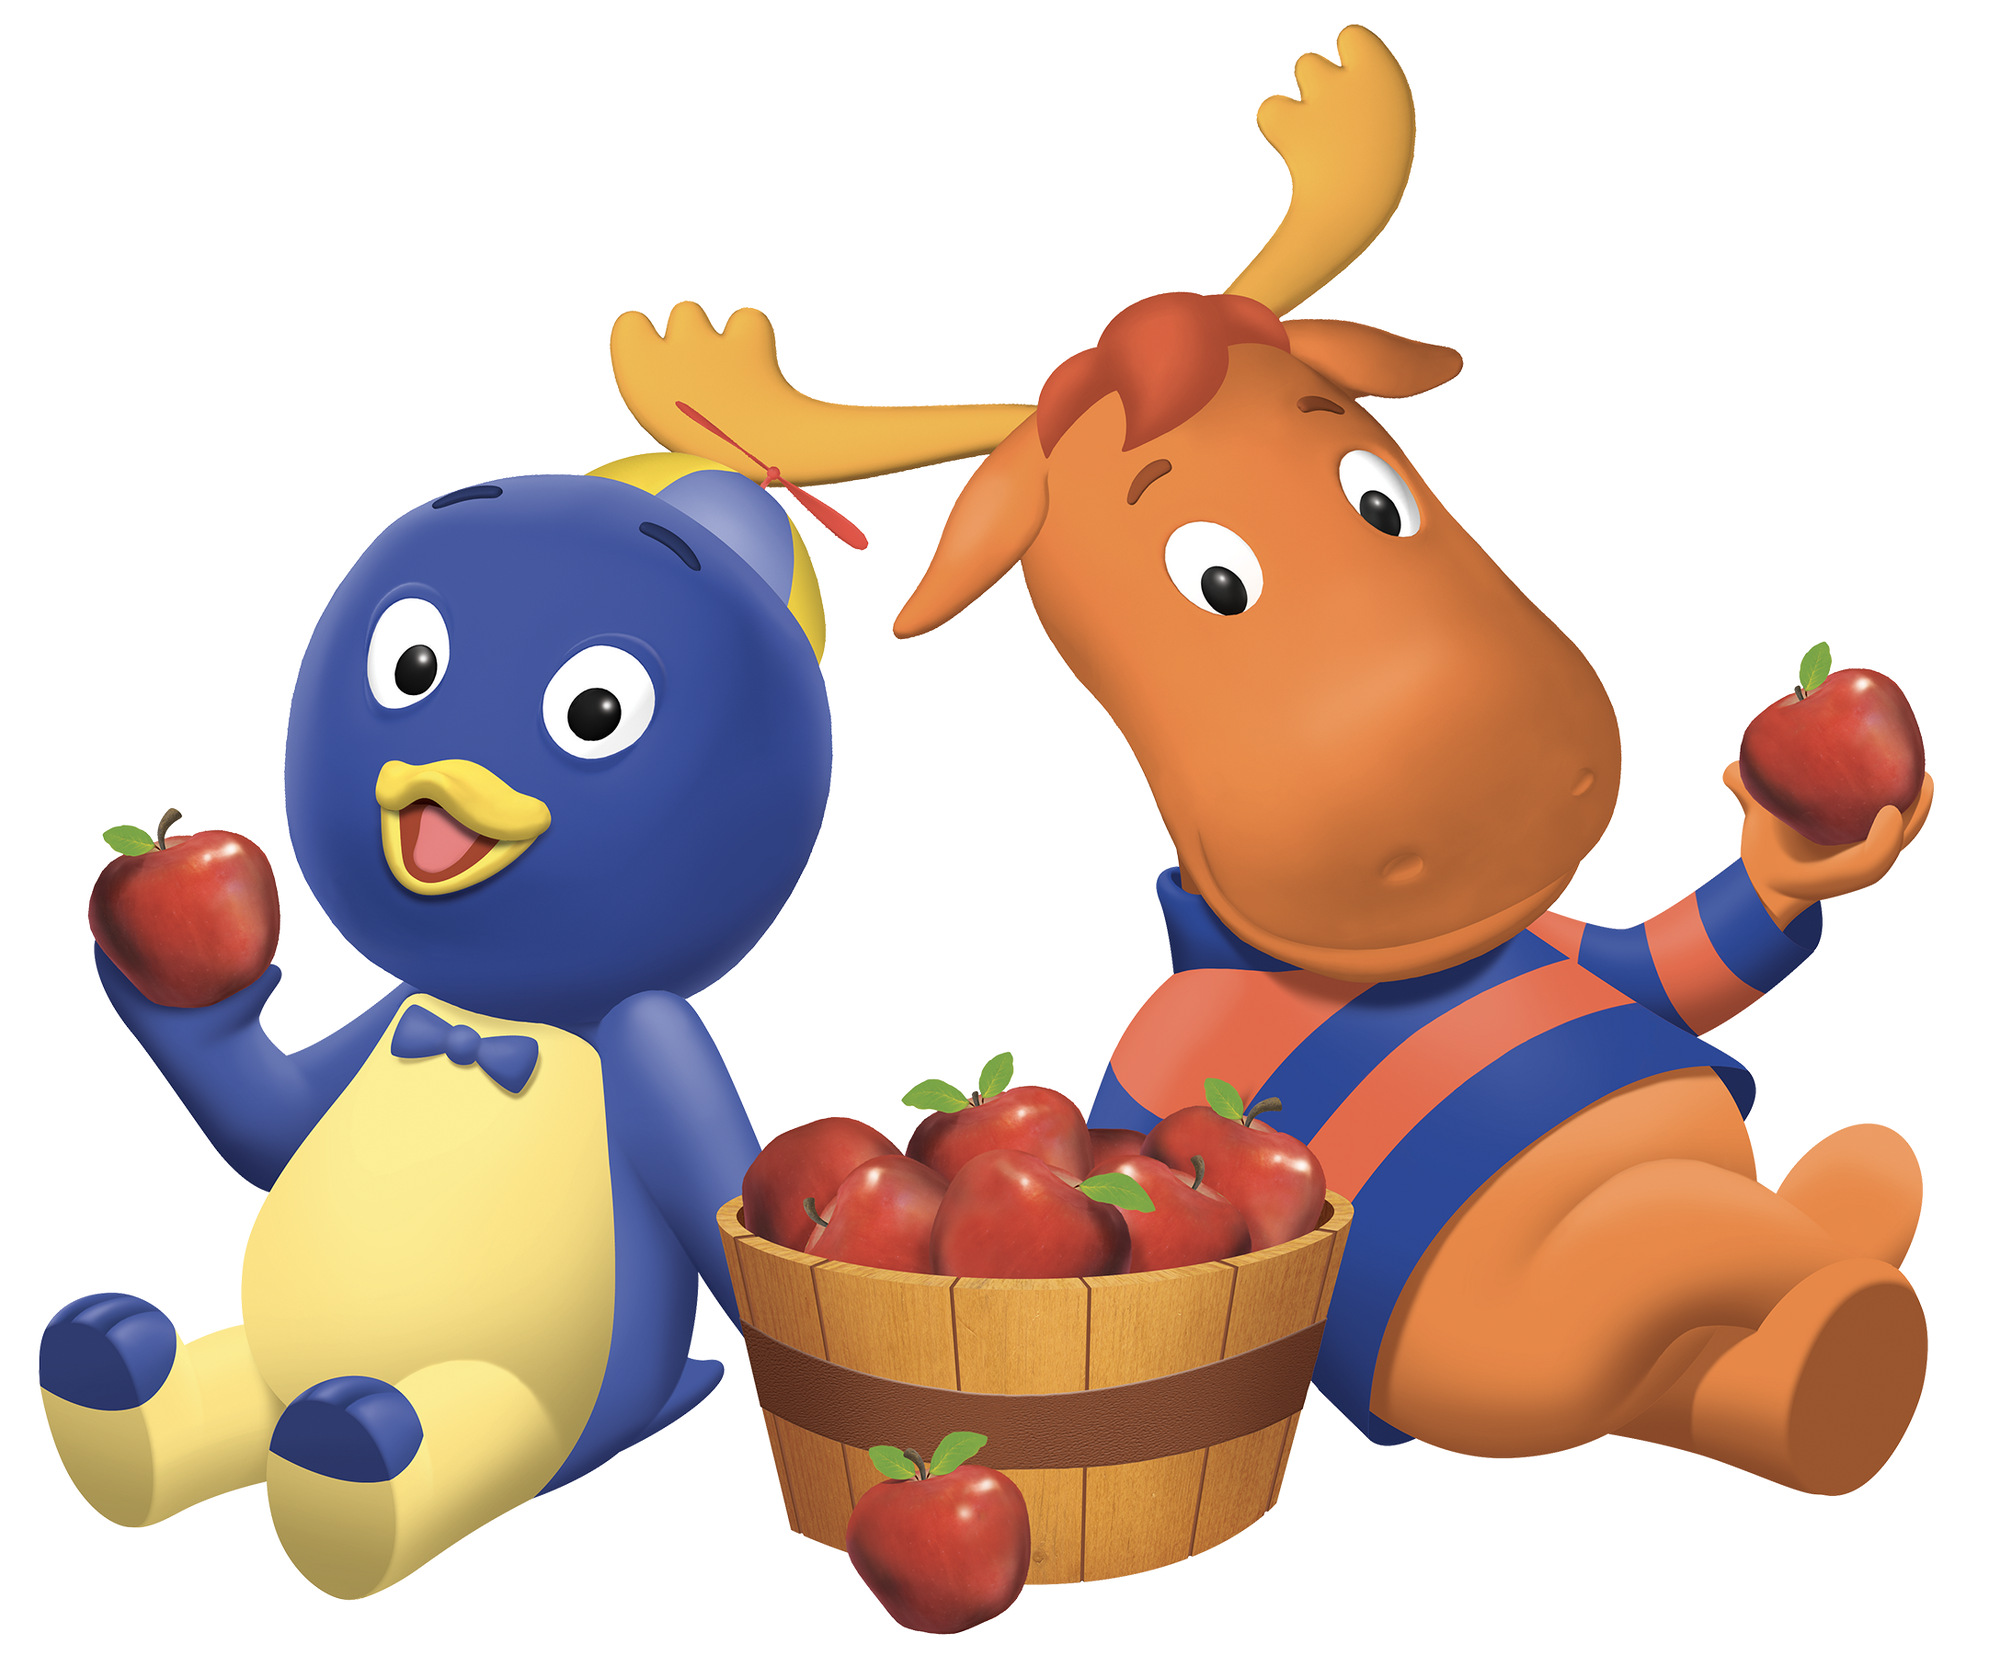 Image The Backyardigans Pablo And Tyrone Apples Nickelodeon Nick Jr Characters Image Png